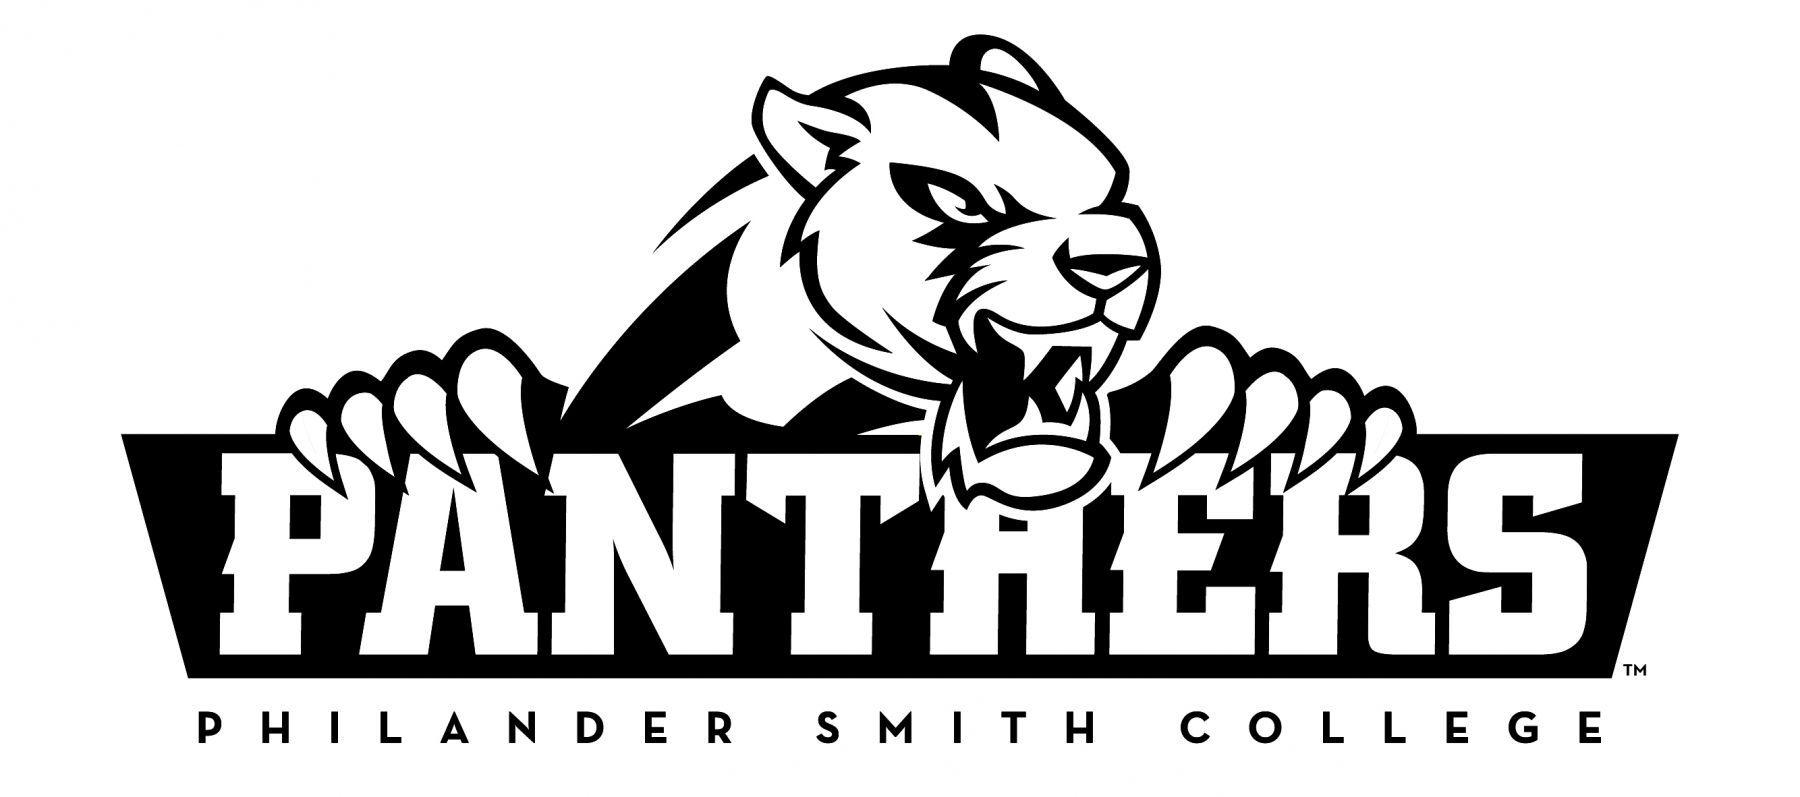 Panther College Logo - Quick Facts | Philander Smith College Athletics